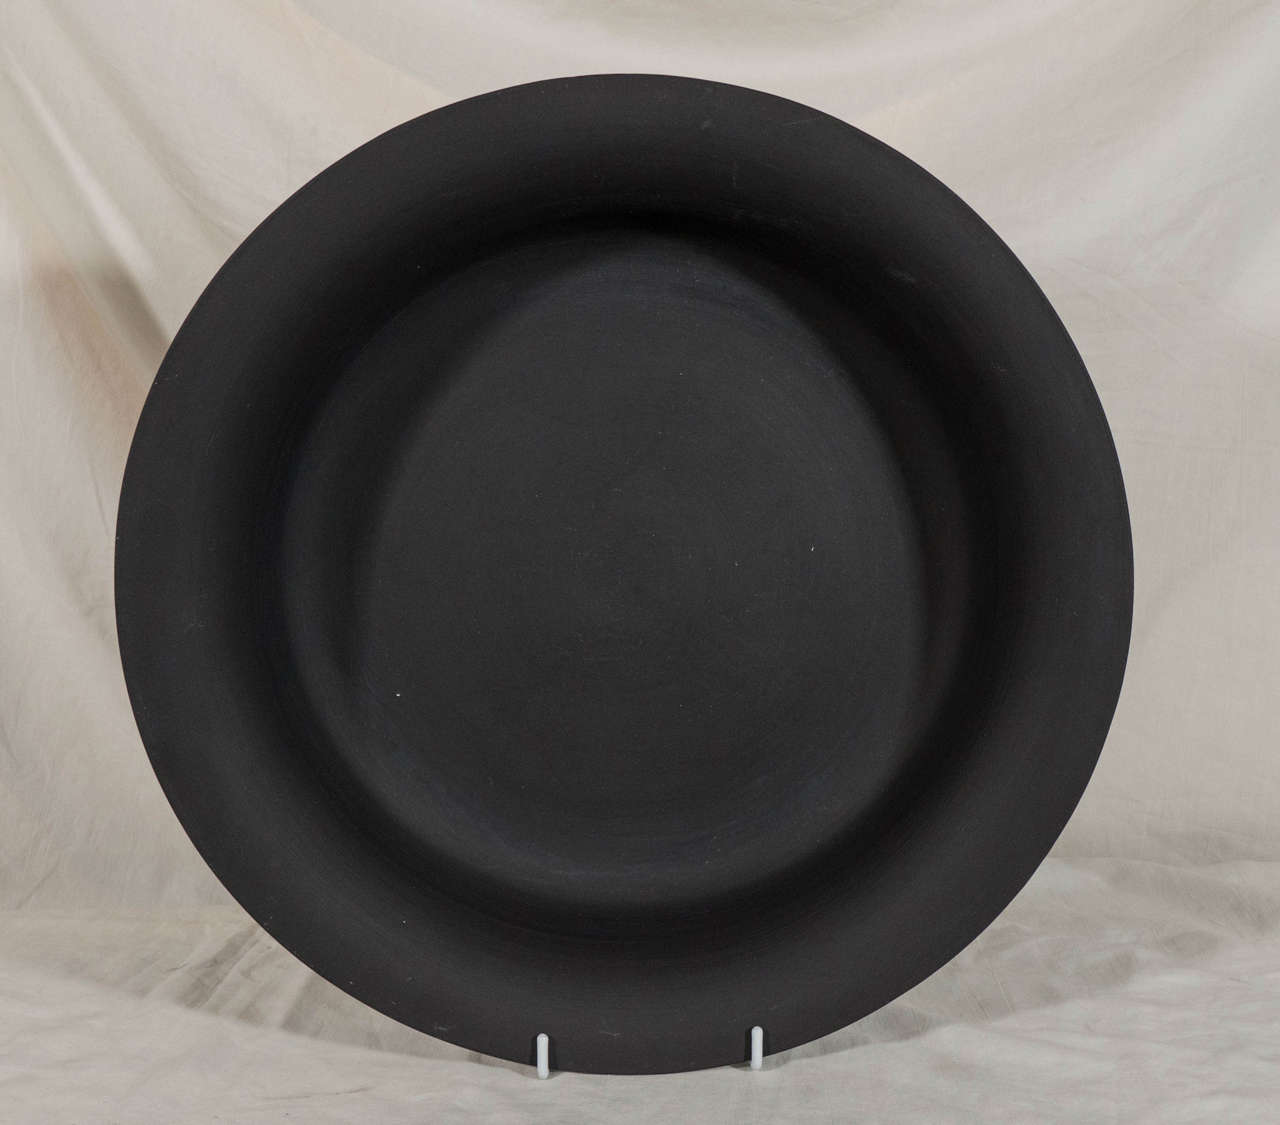 A large Wedgwood Black Basalt bowl with a low open form and simple everted lip.
Black Basalt was created by Josiah Wedgwood in the 18th century. Wedgwood transformed Egyptian Black, a traditional Staffordshire stoneware, into Black Basalt. Before